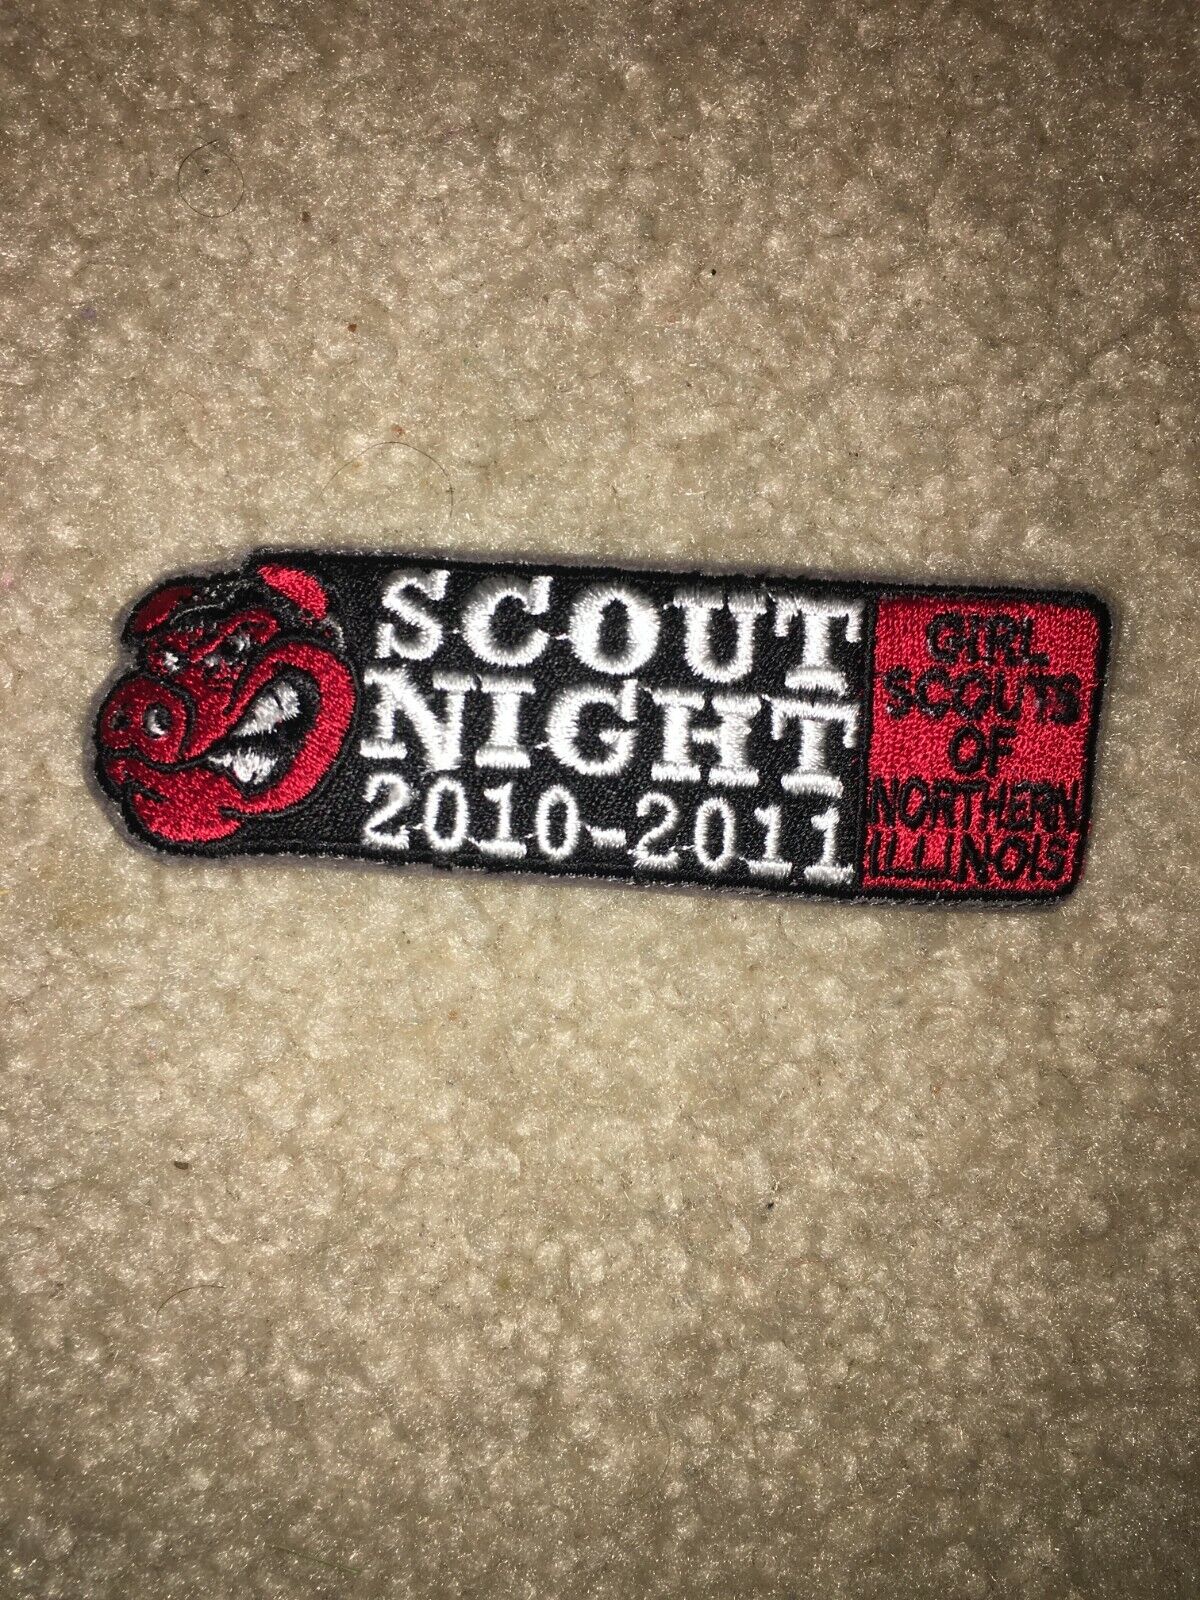 Scout Girl Rockford Ice Hogs Hockey 2010 2011 Illinois Council Sport Patch